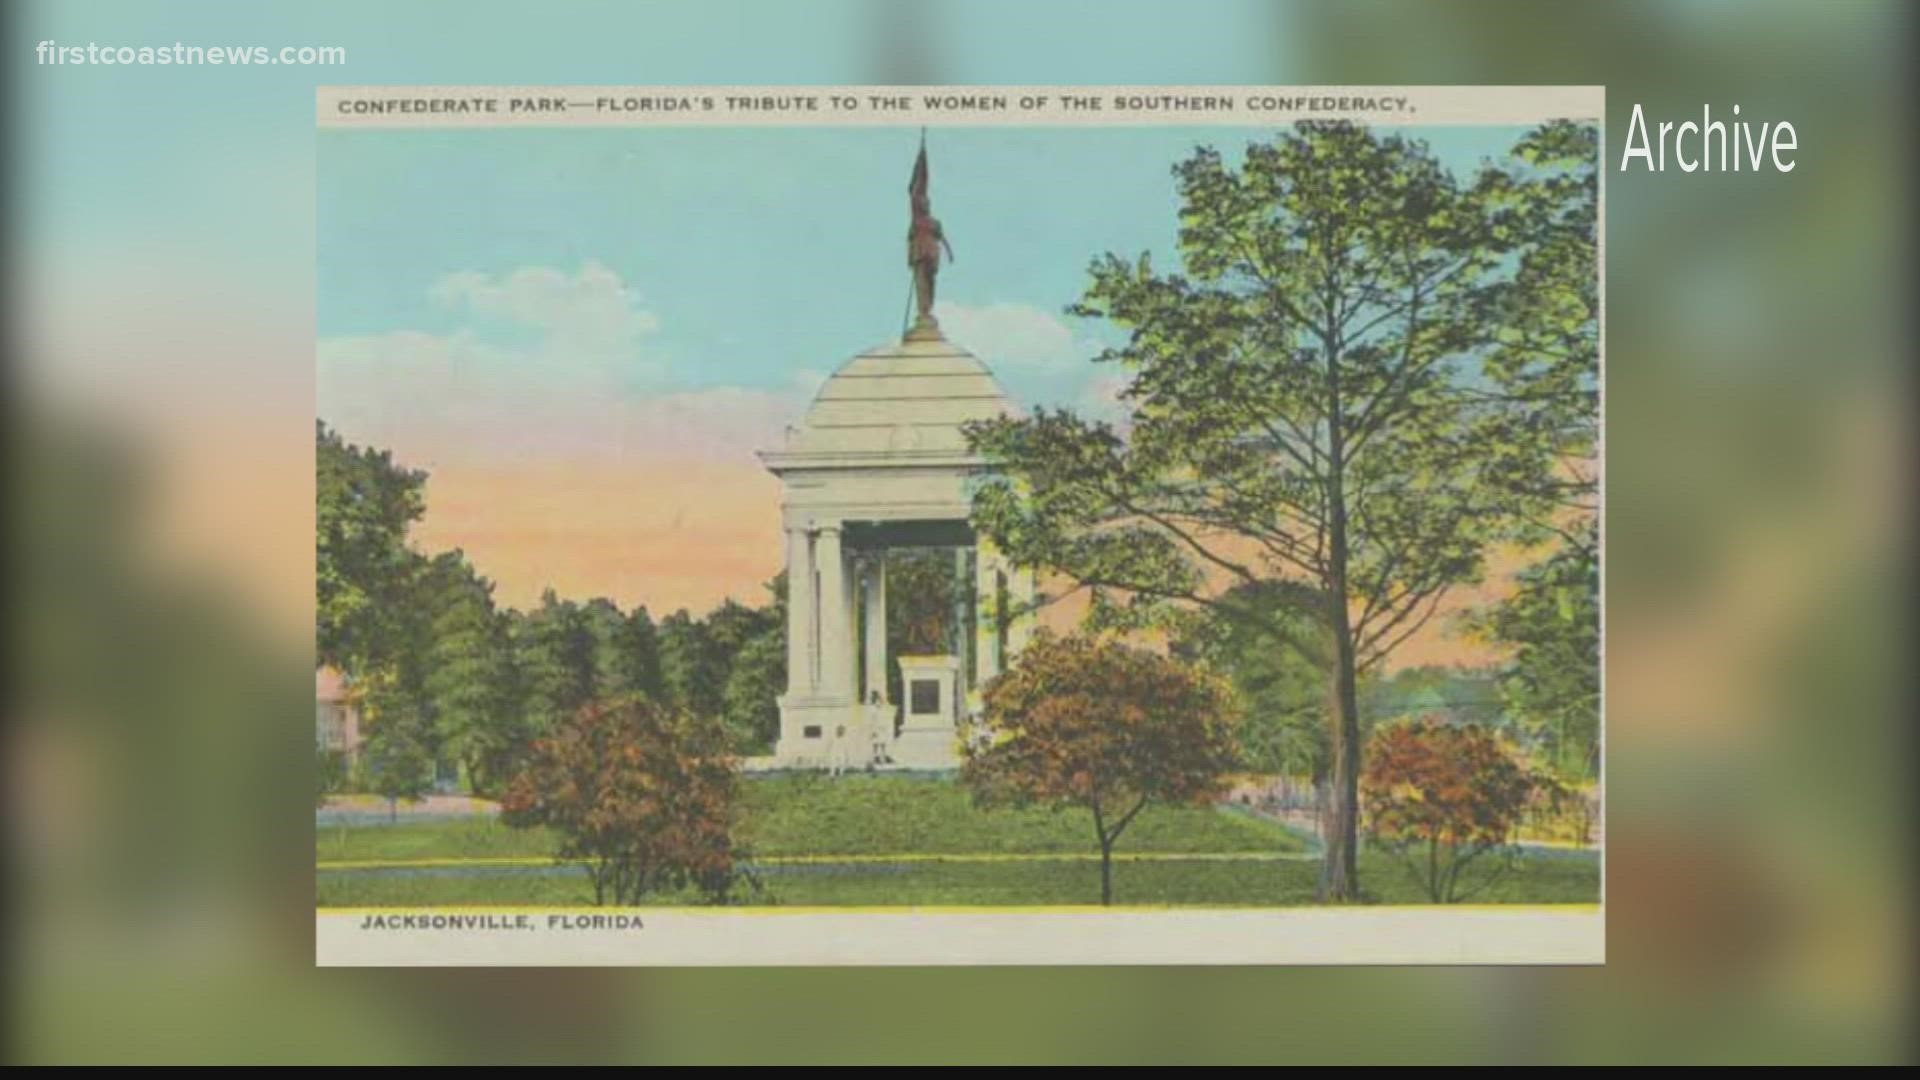 The United Confederate Veterans erected the memorial, but the state paid for more than half of it.